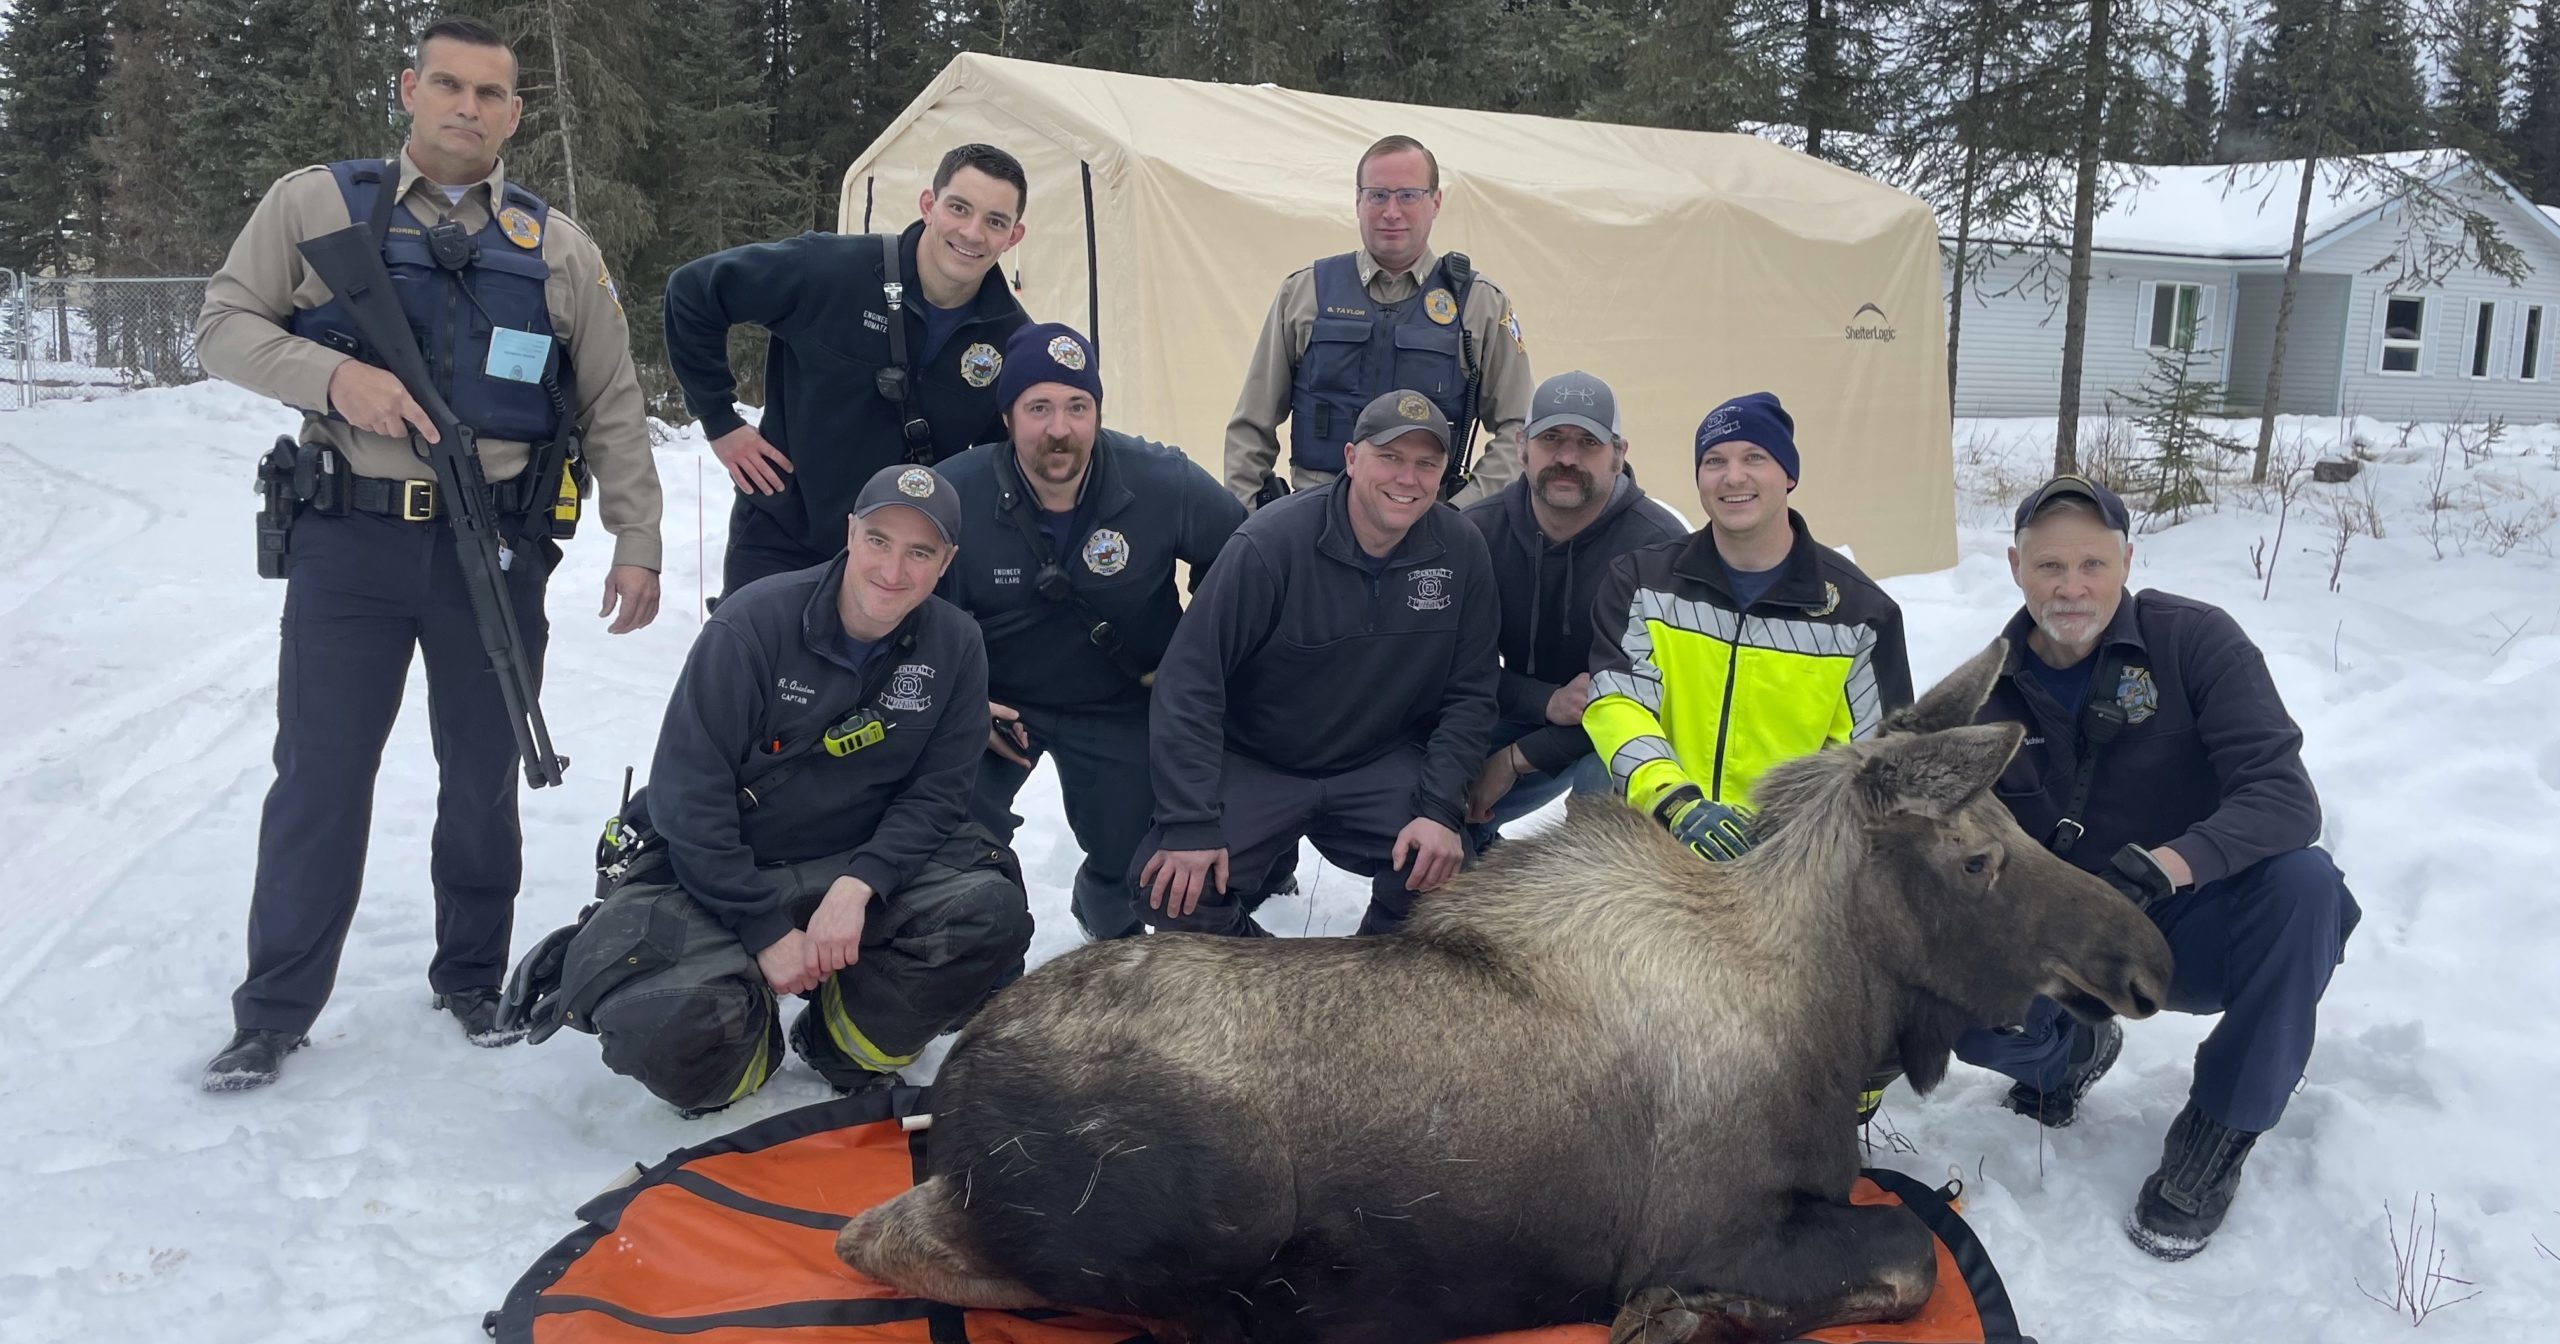 In this image provided by the Central Emergency Services on the Kenai Peninsula, firefighters and personnel from the Alaska Wildlife Troopers and Alaska Department of Fish and Game pose with the moose they helped rescue after it had fallen through a window well at a home in Soldotna, Alaska, on Sunday.